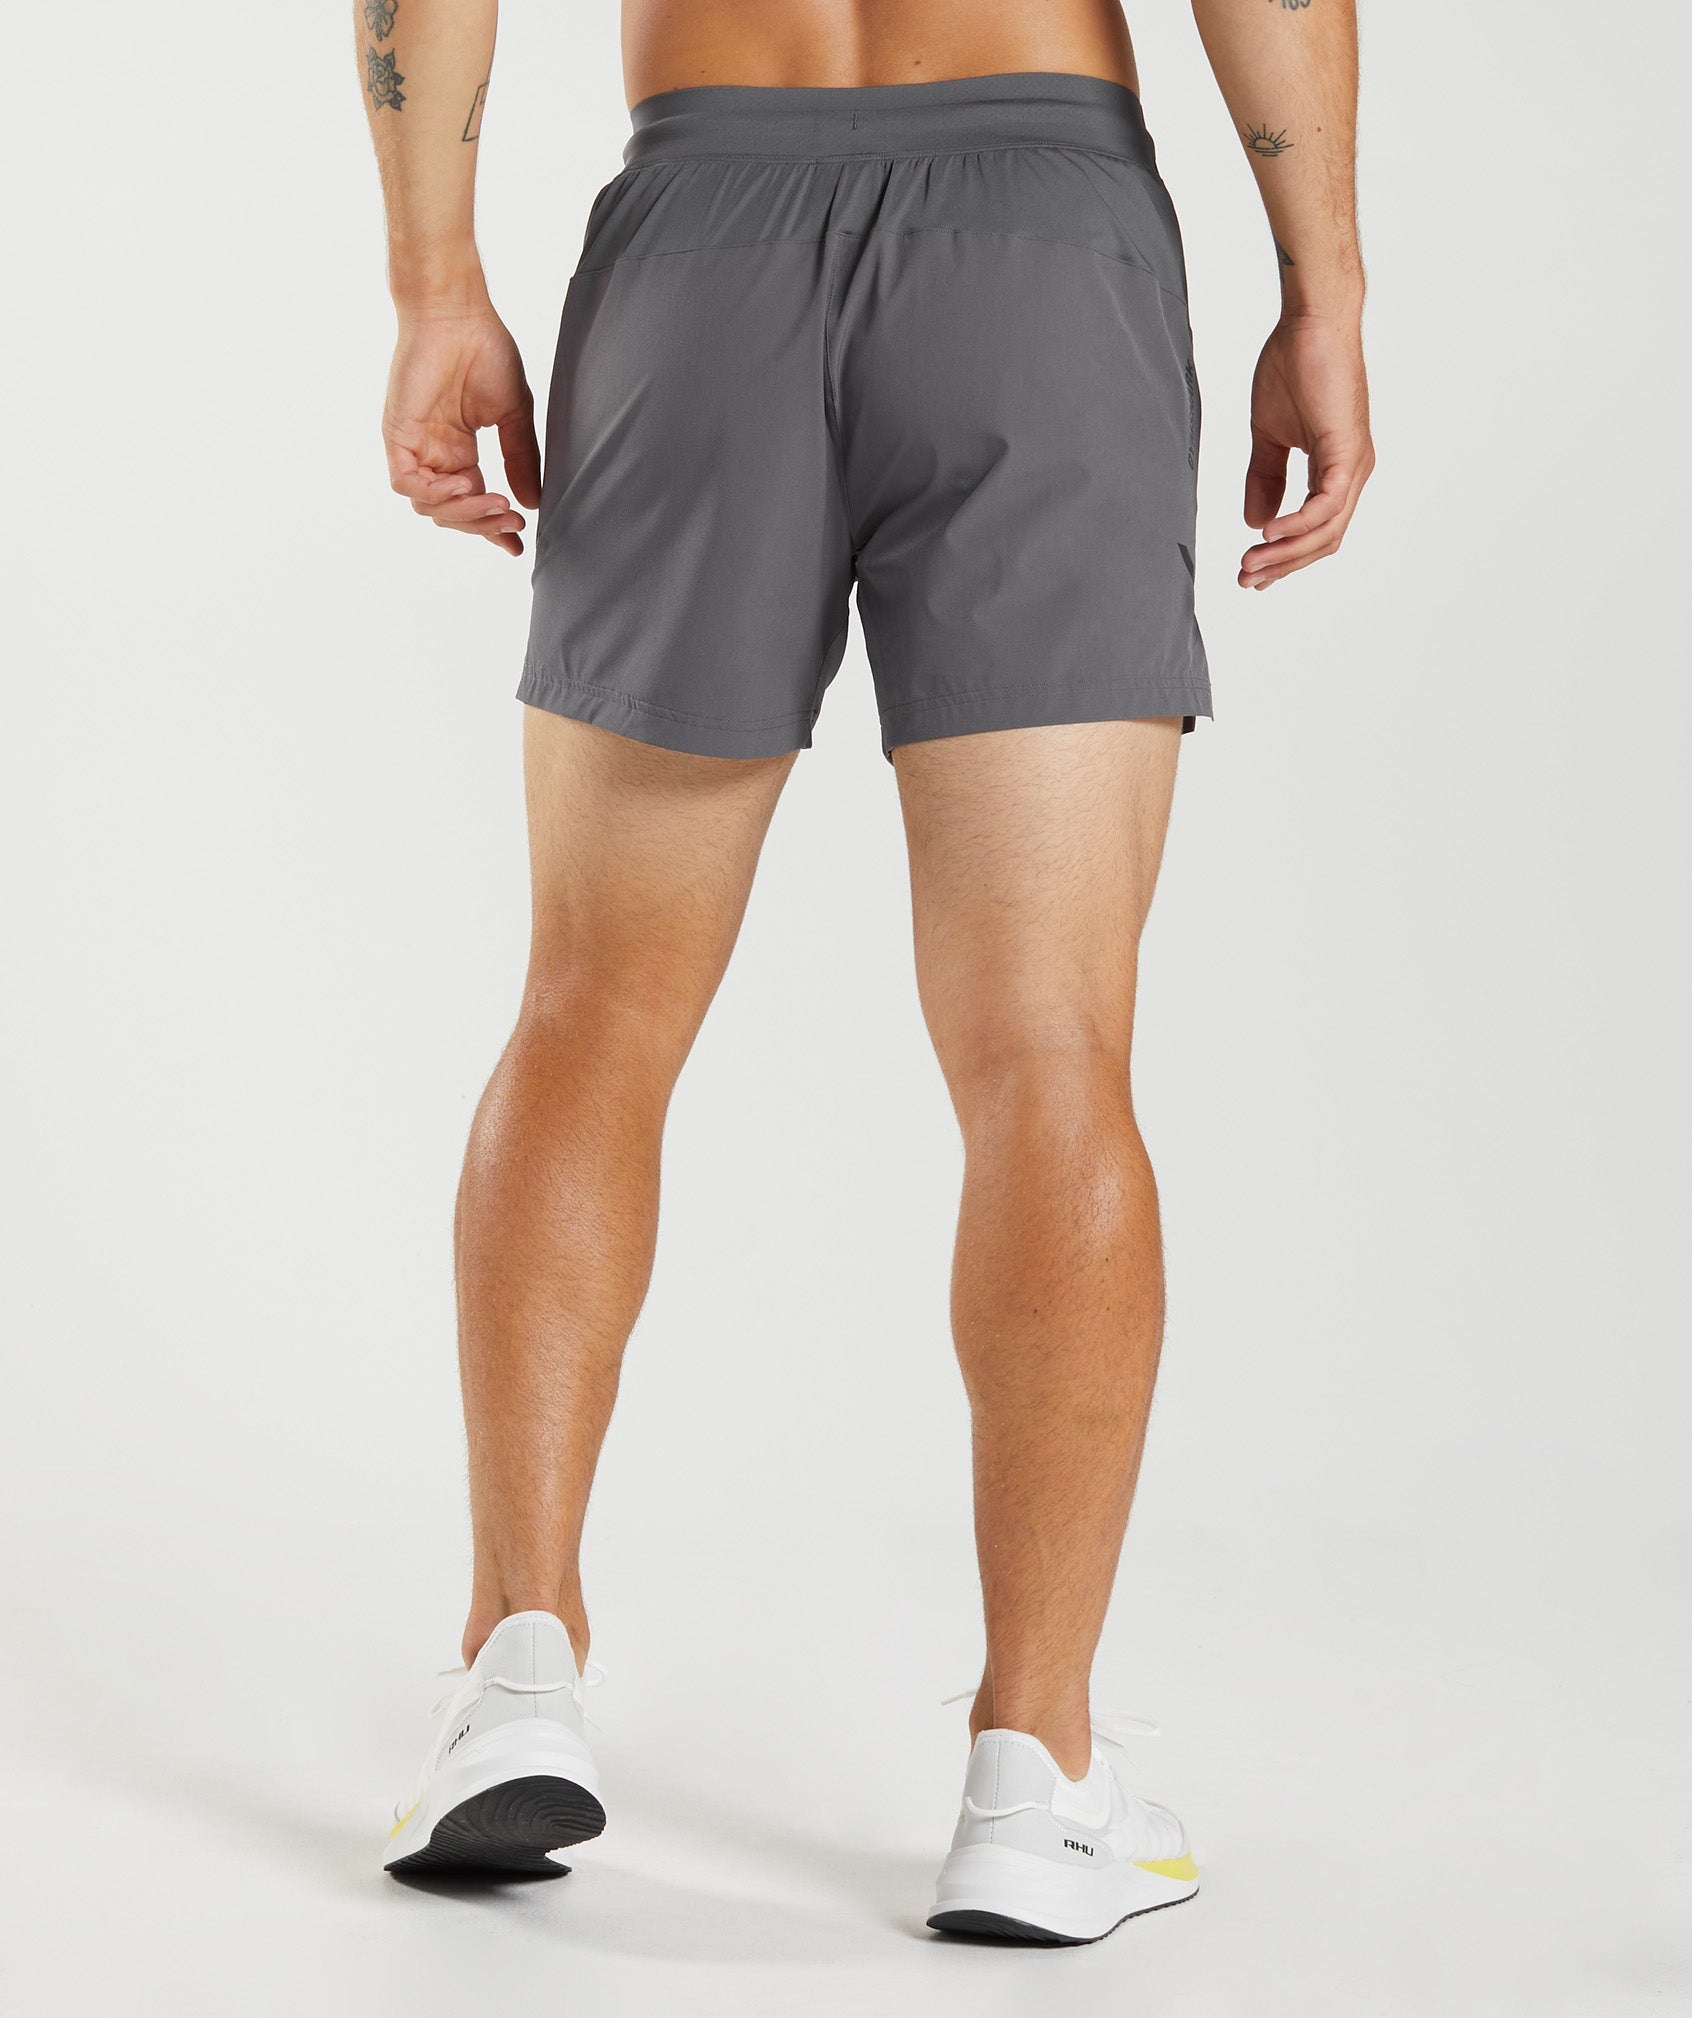 Apex 5" Perform Shorts in Silhouette Grey